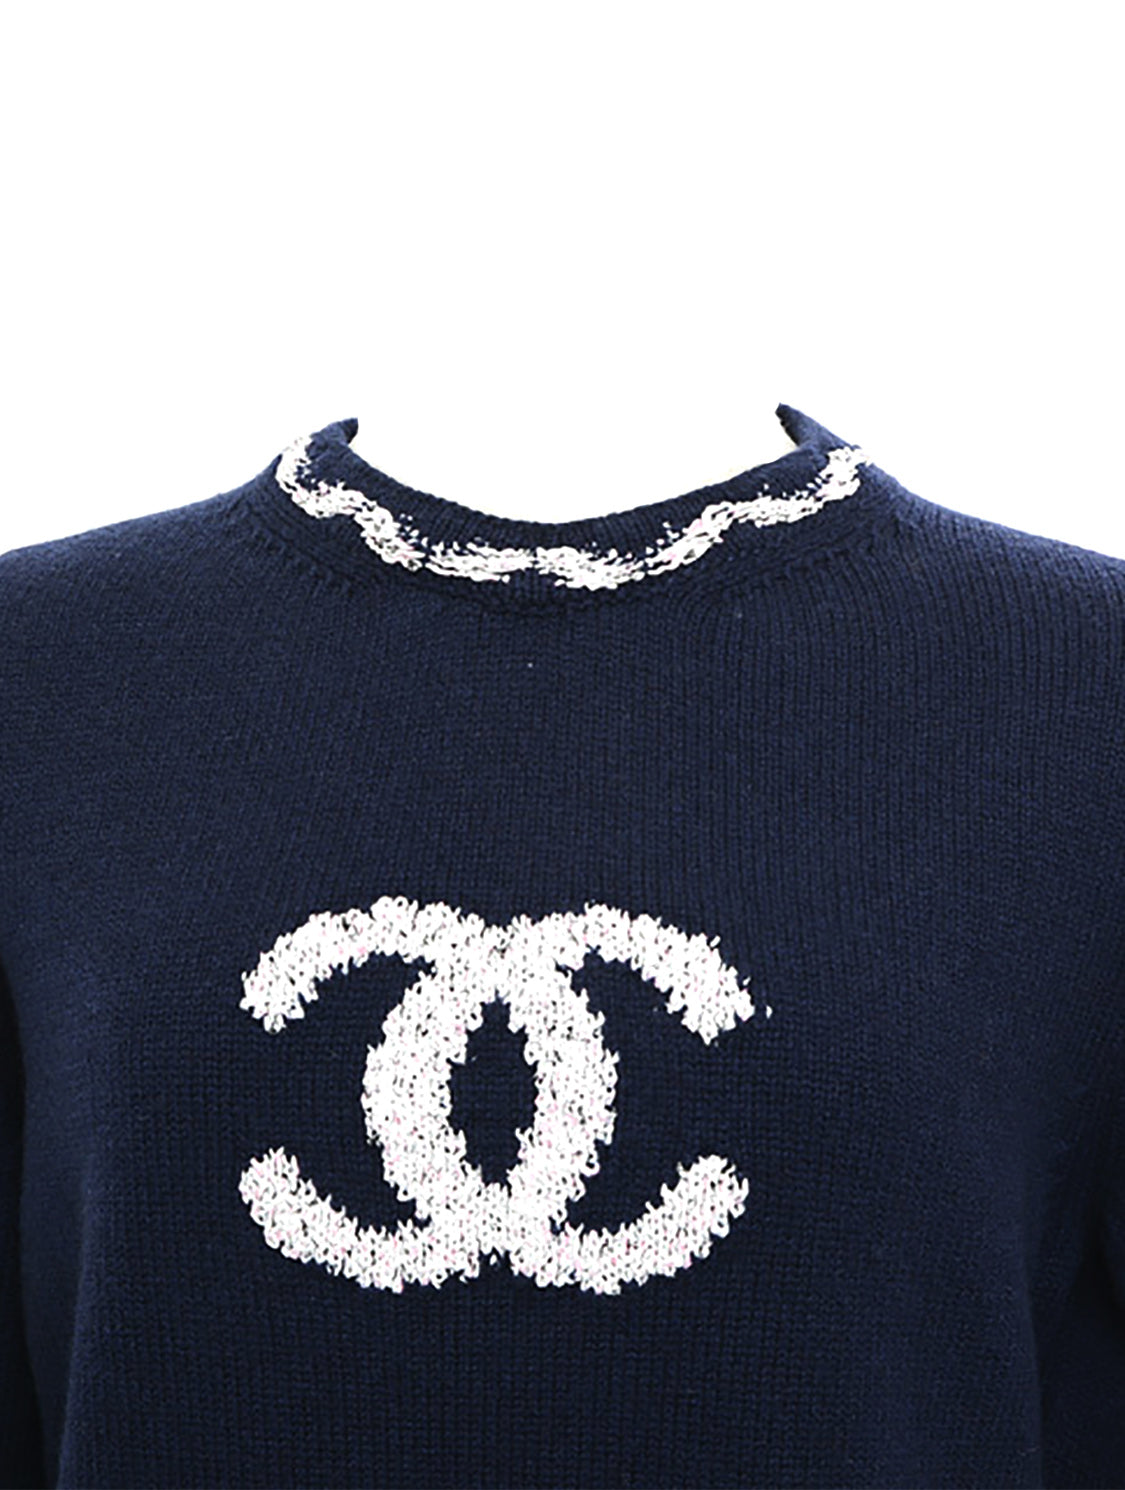 Chanel Winter Snow Outfit  Sarah Christine